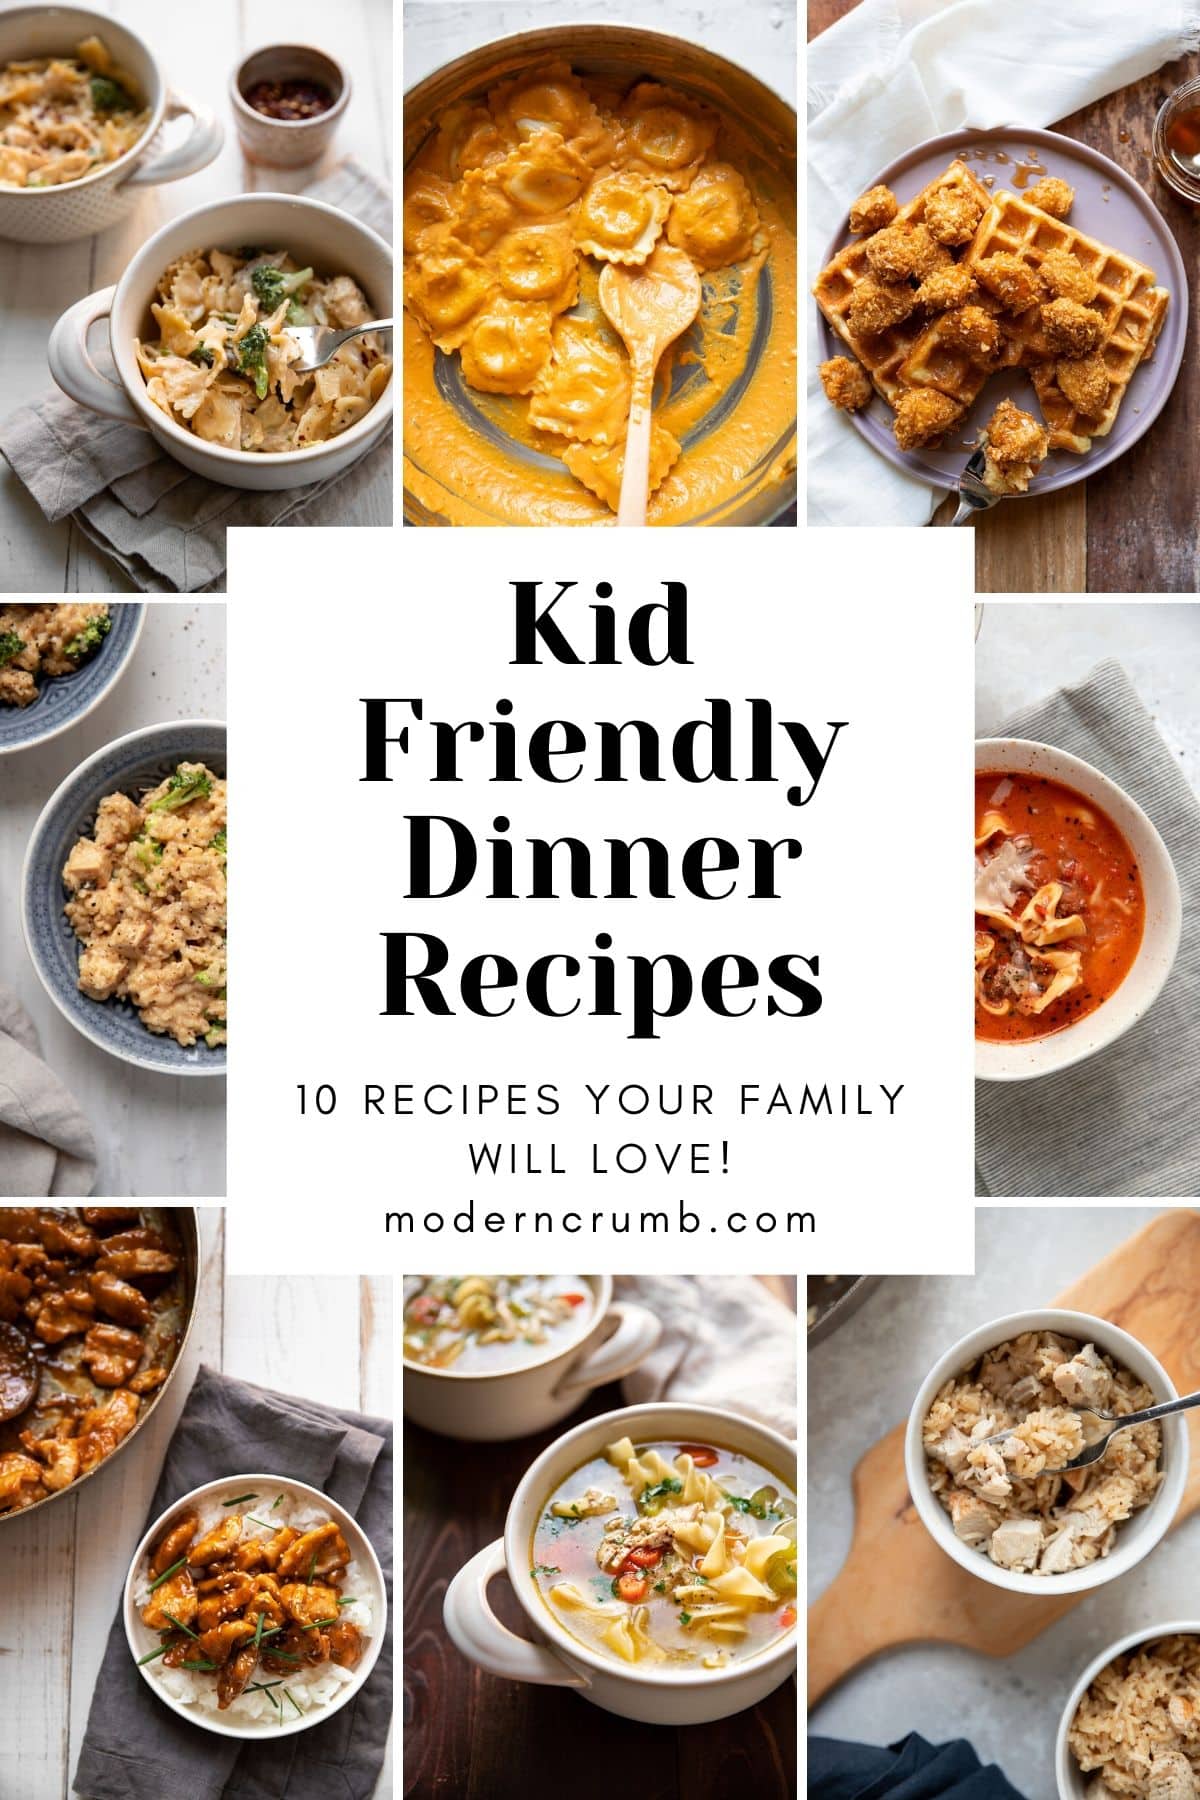 Kid Friendly Dinner Recipes 10 Recipes Your Family Will Love Modern Crumb